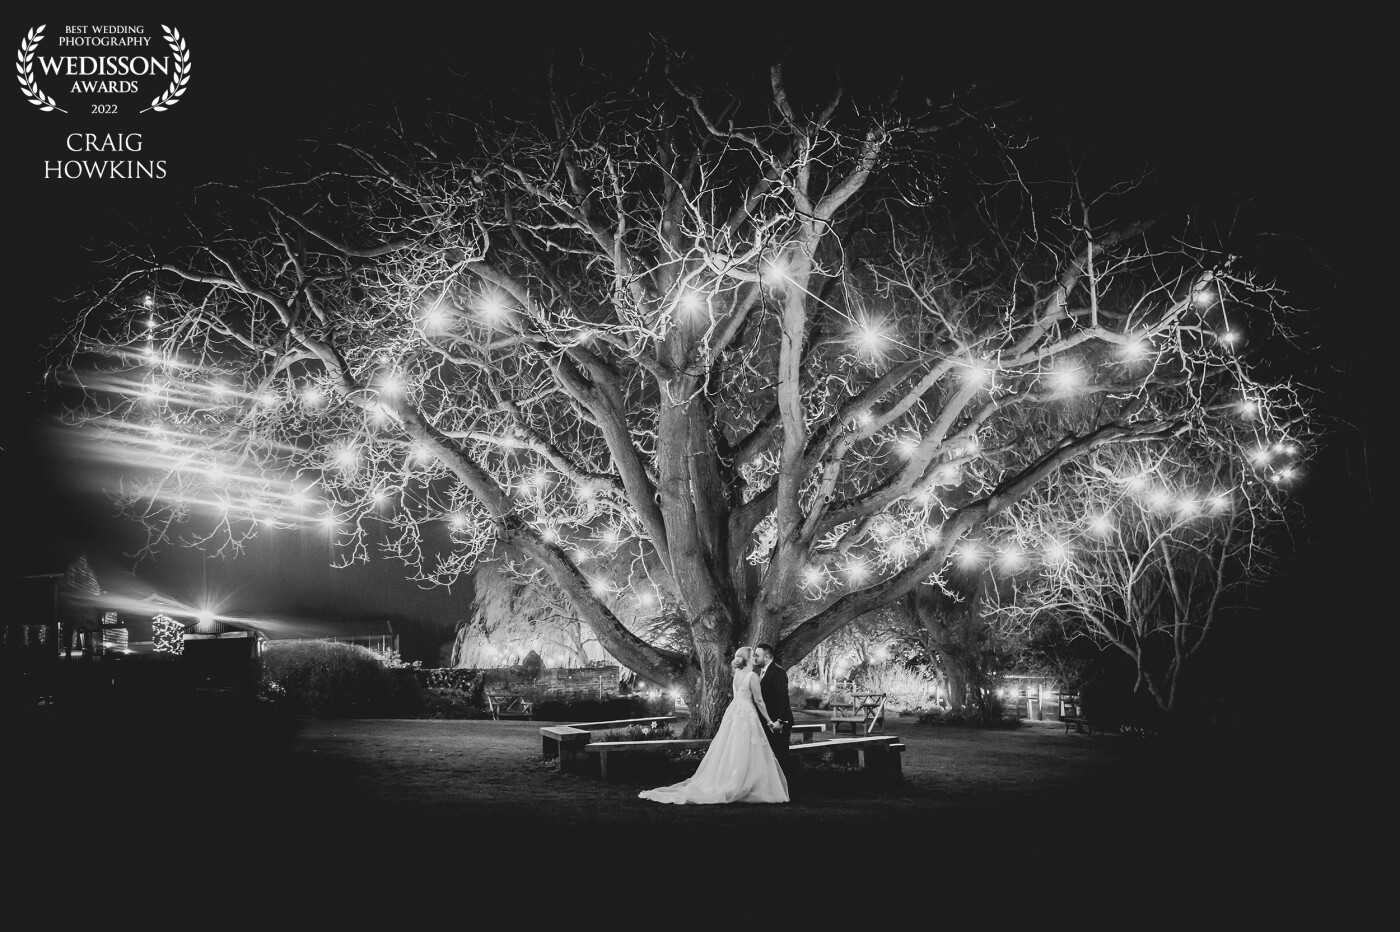 My second award from this wedding in Northamptonshire. I love it when I can have so much creative fun with my clients. I took this image at the end of the day and the cold air gave the image a lens flare from the tree lights. What an epic shot!